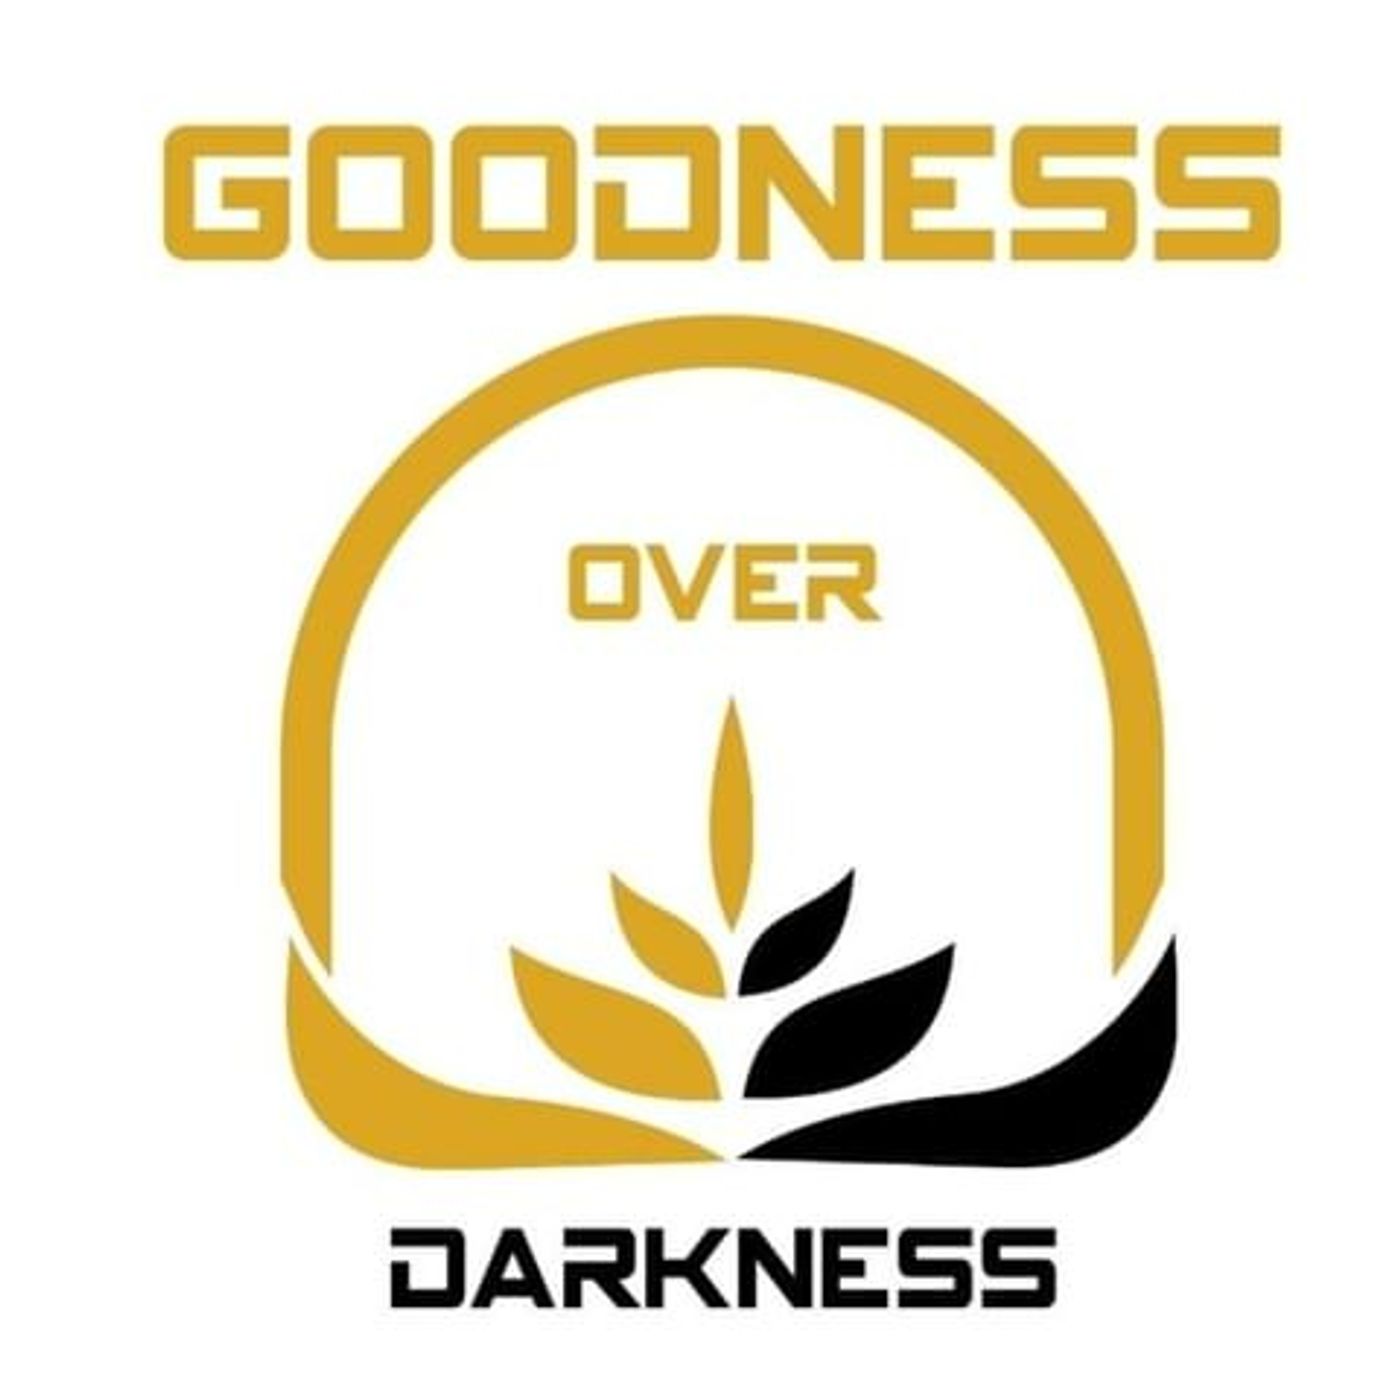 NY Patriot W/ Todd Armstrong from Goodness Over Darkness